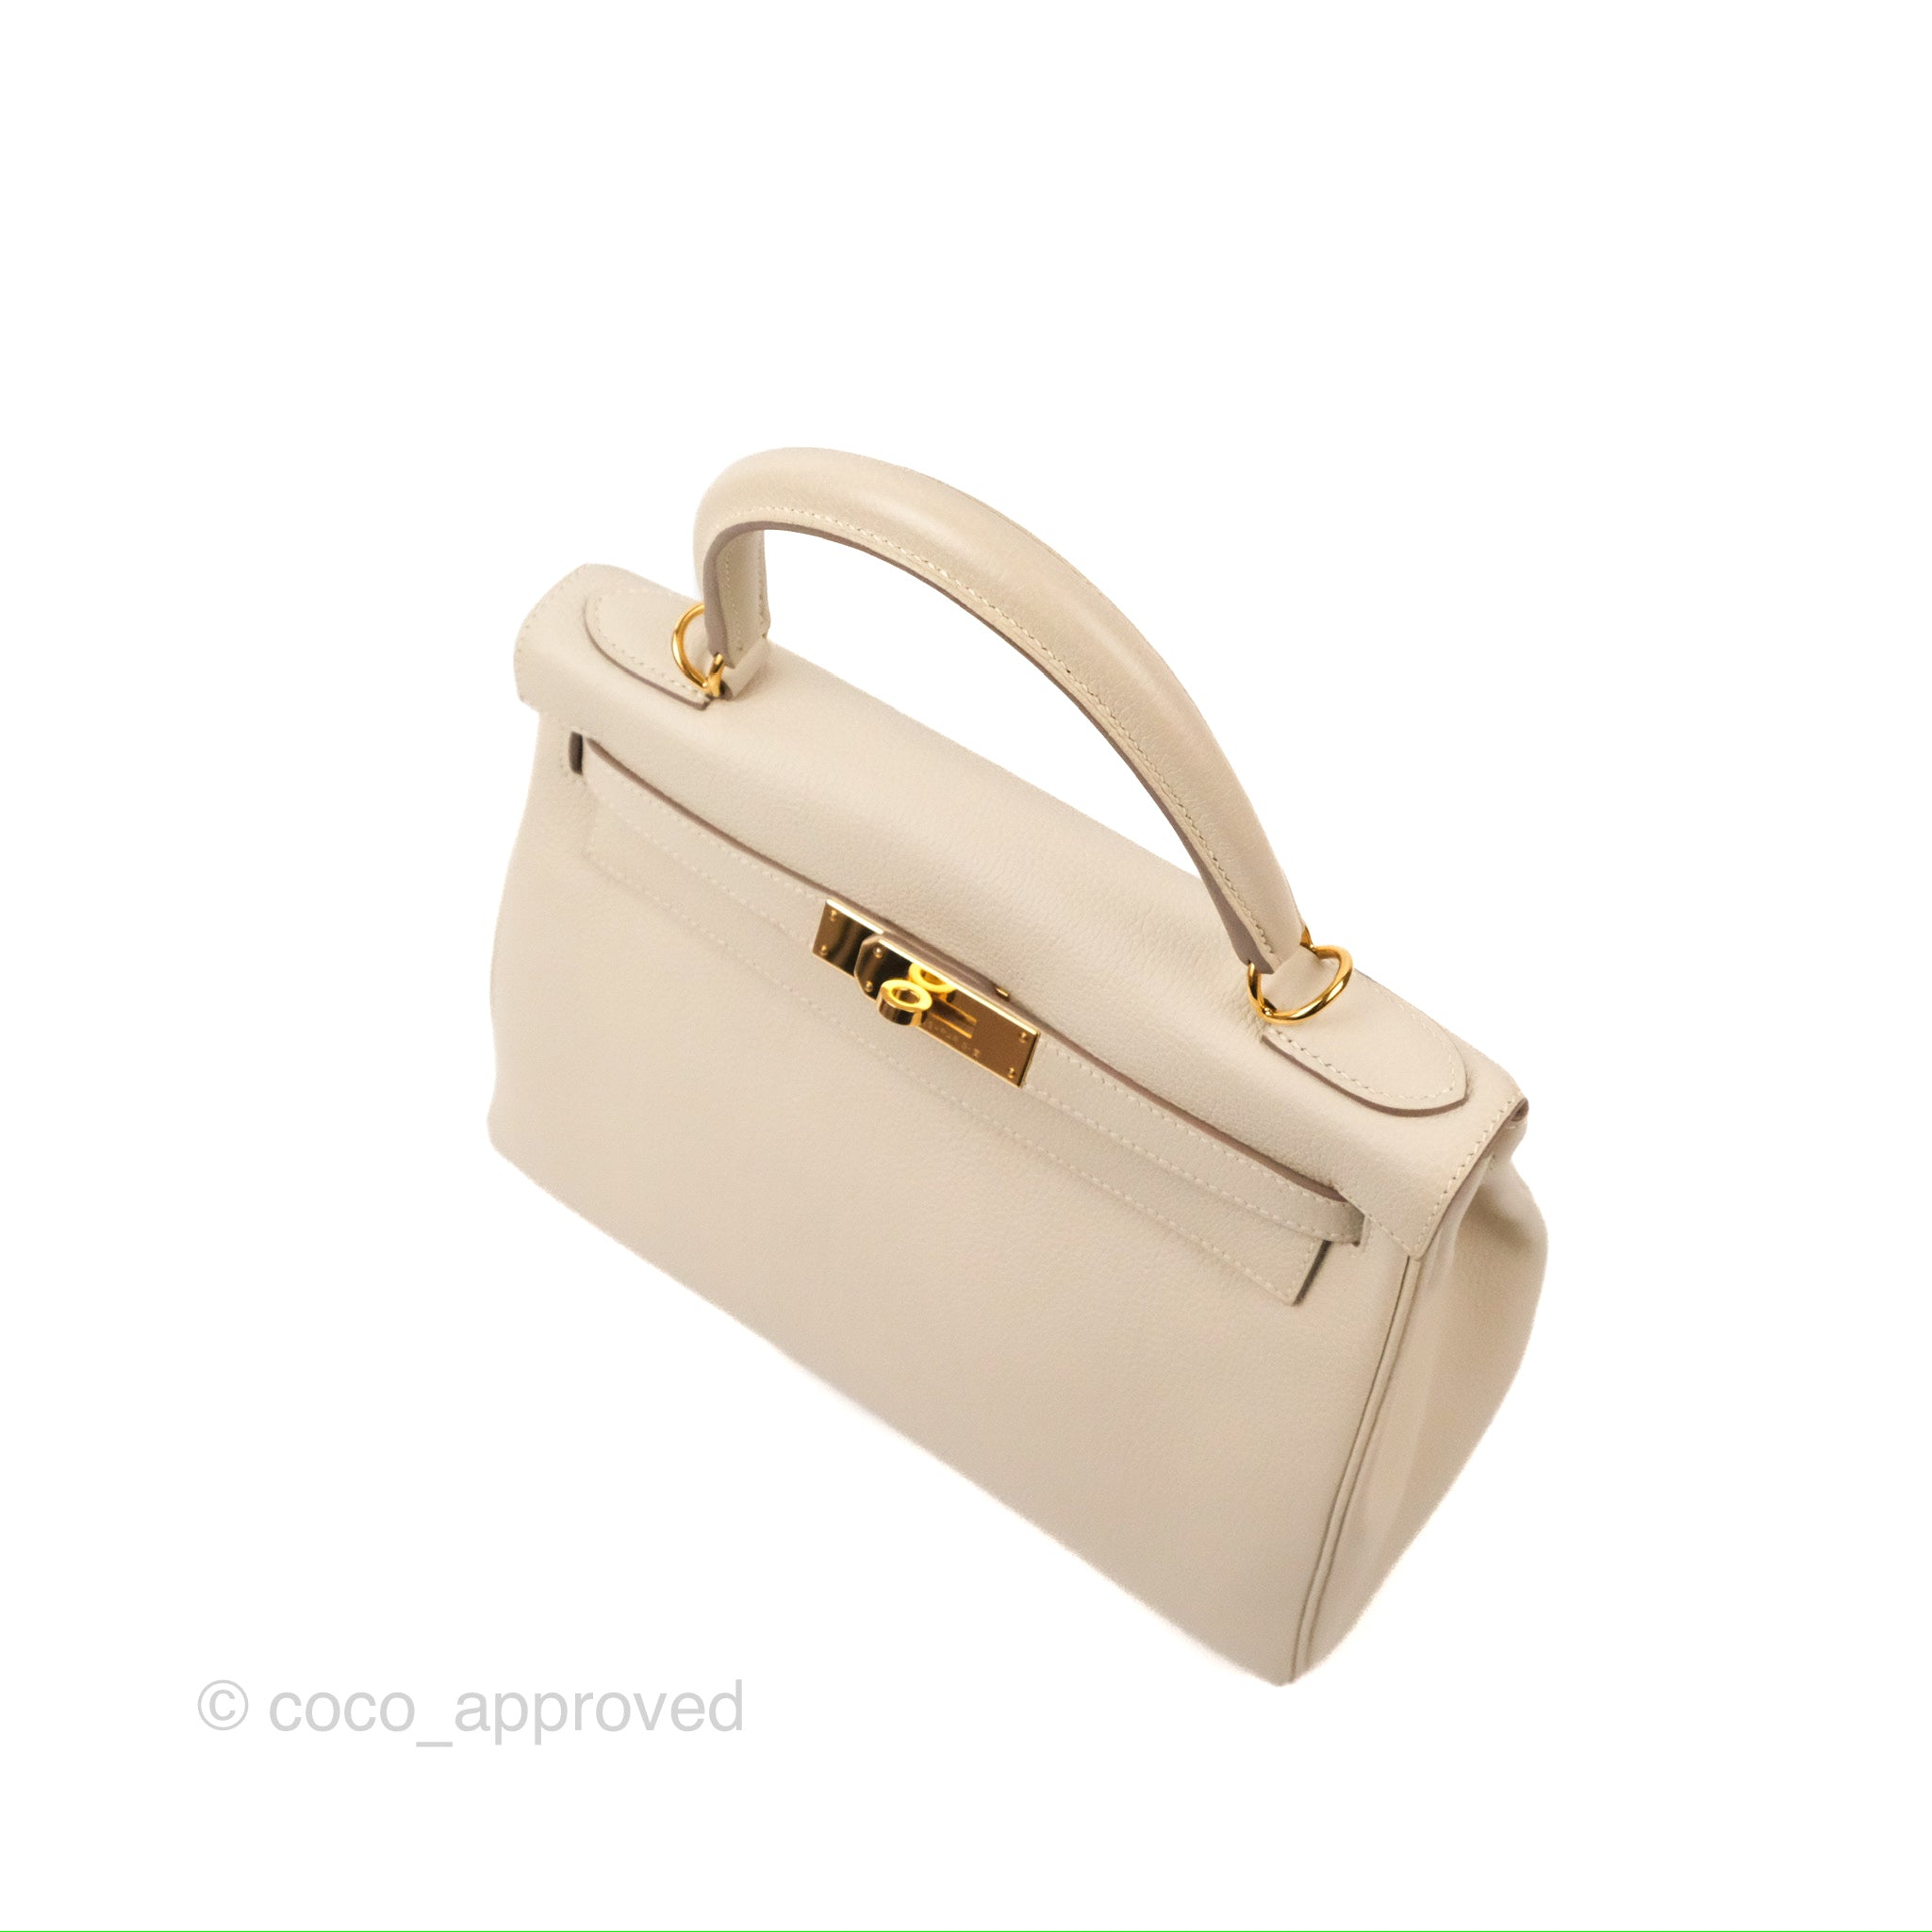 JUST ARRIVED ! BRAND NEW ! Hermes Kelly 32 Retourne Classic Gold in Togo  Leather Gold Hardware - The Attic Place